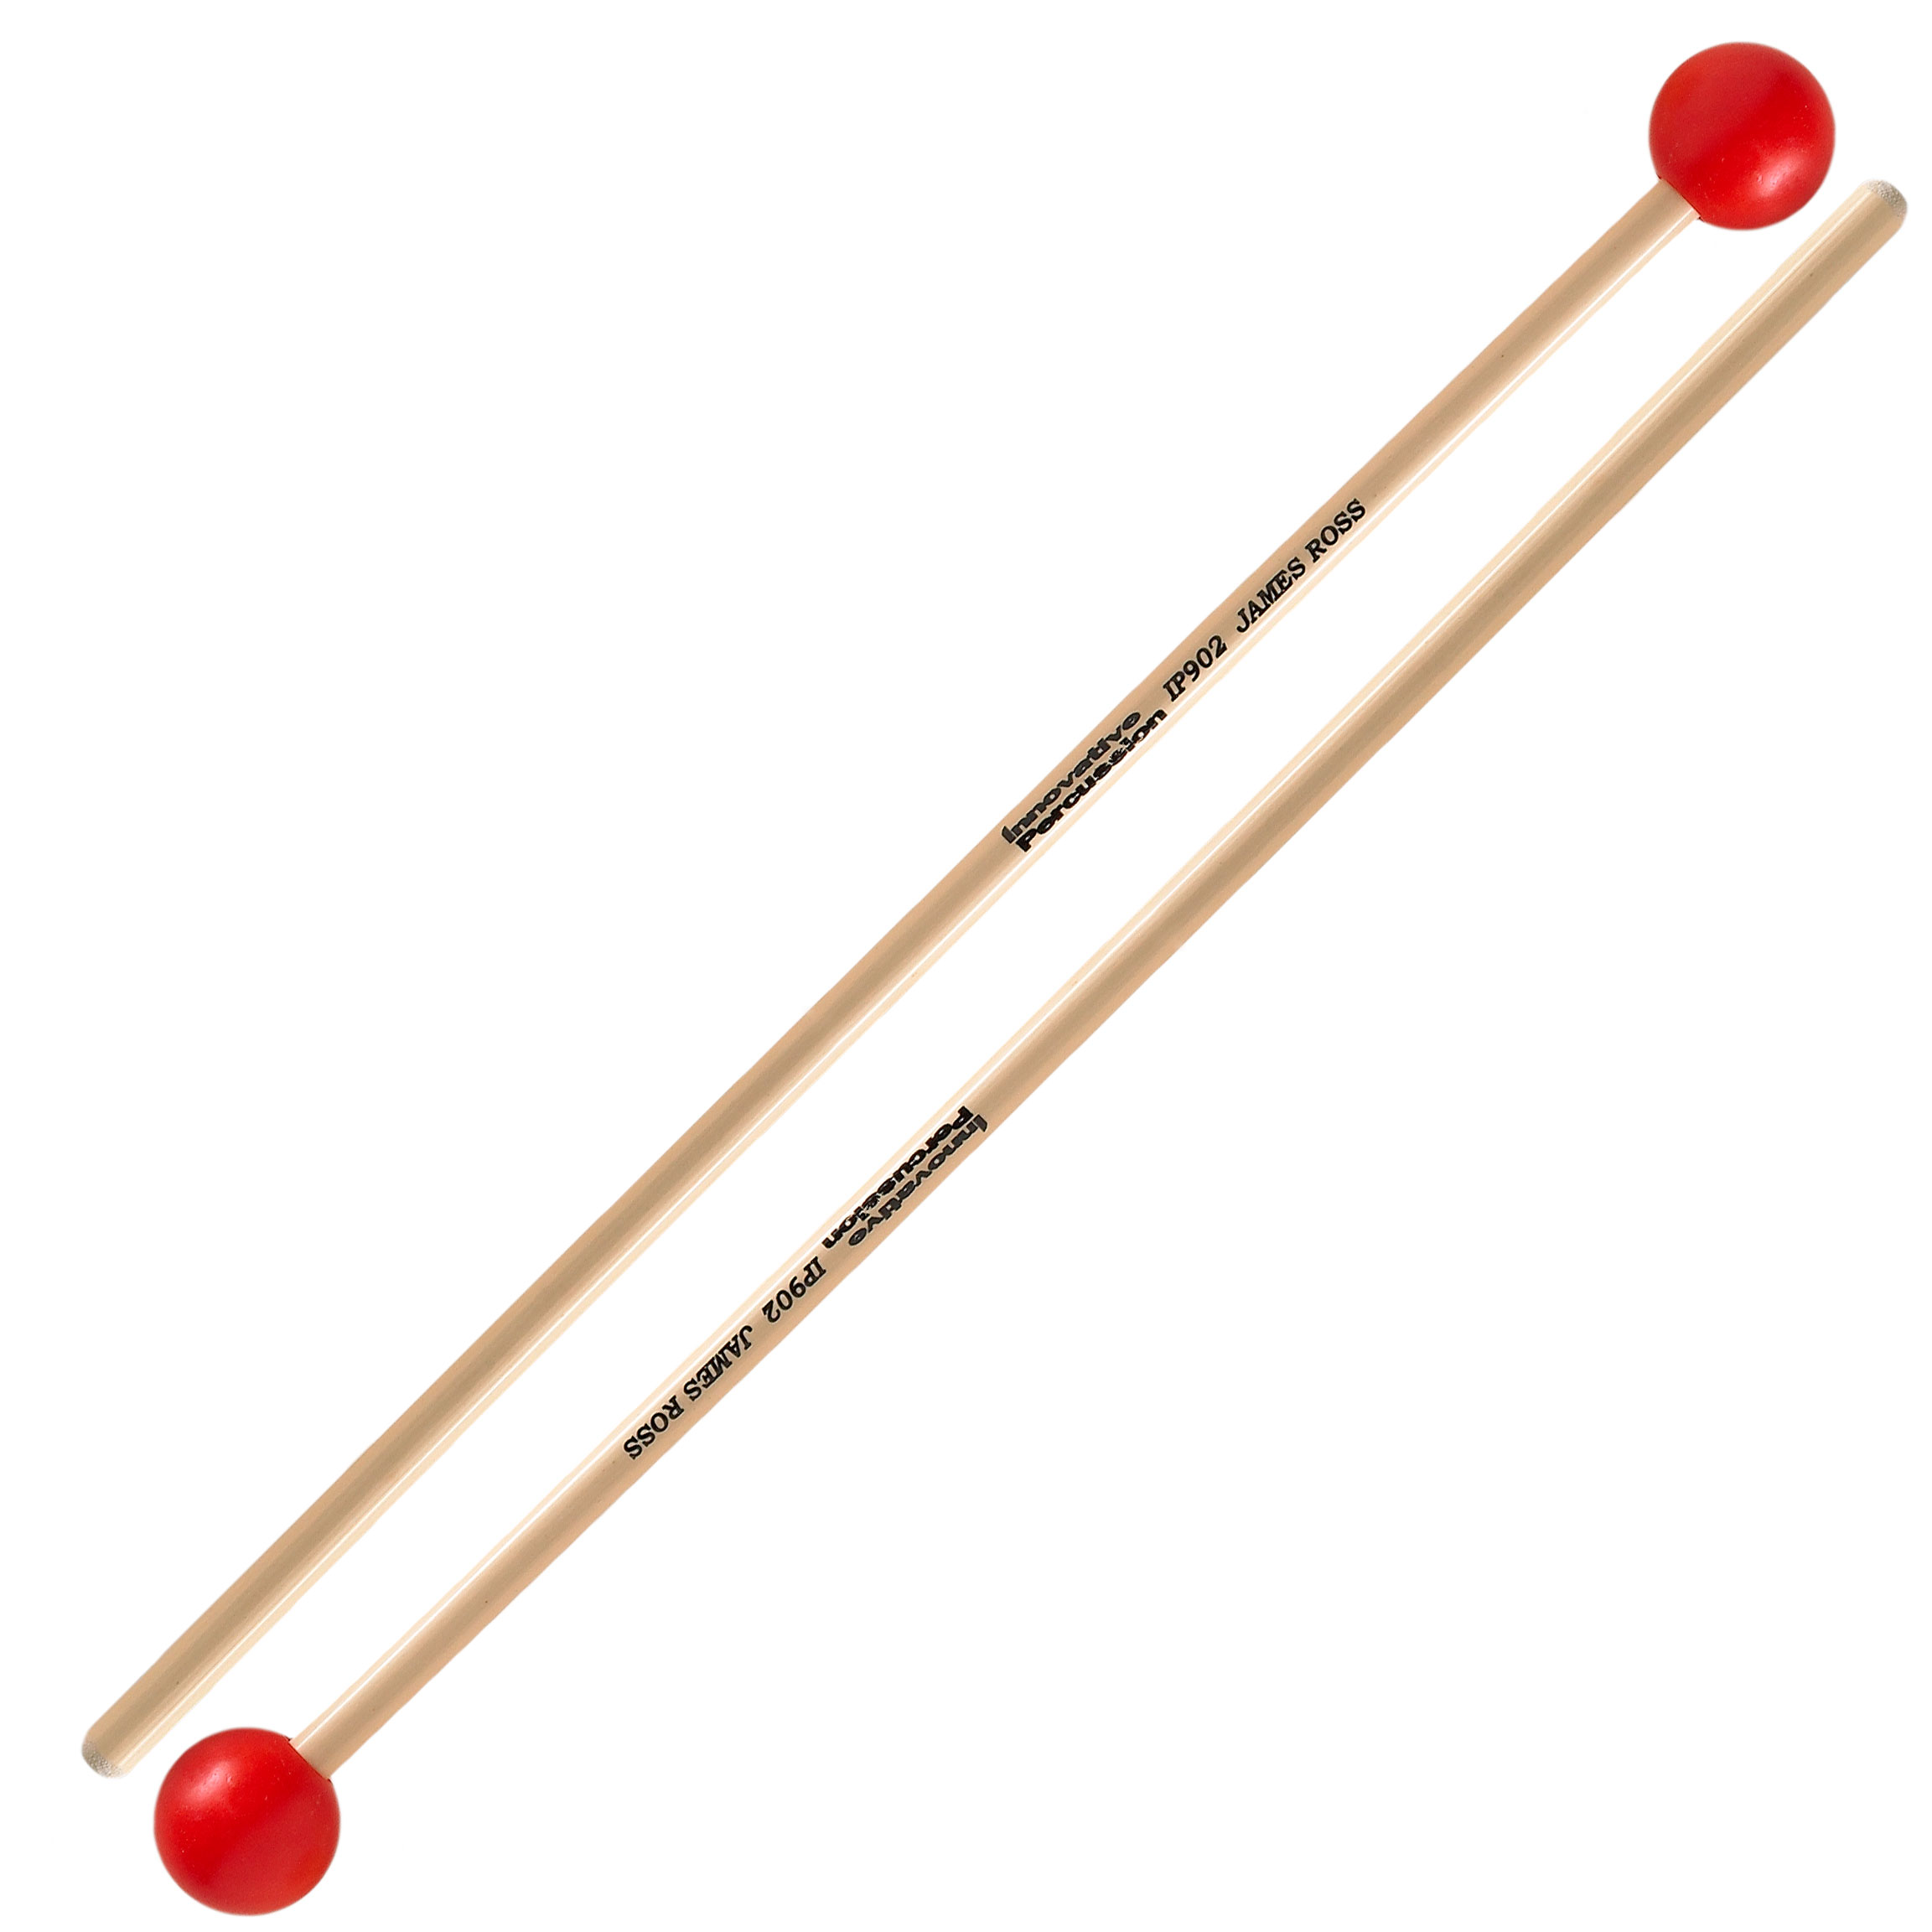 InnovativePercussion Xylophon Stick James Ross